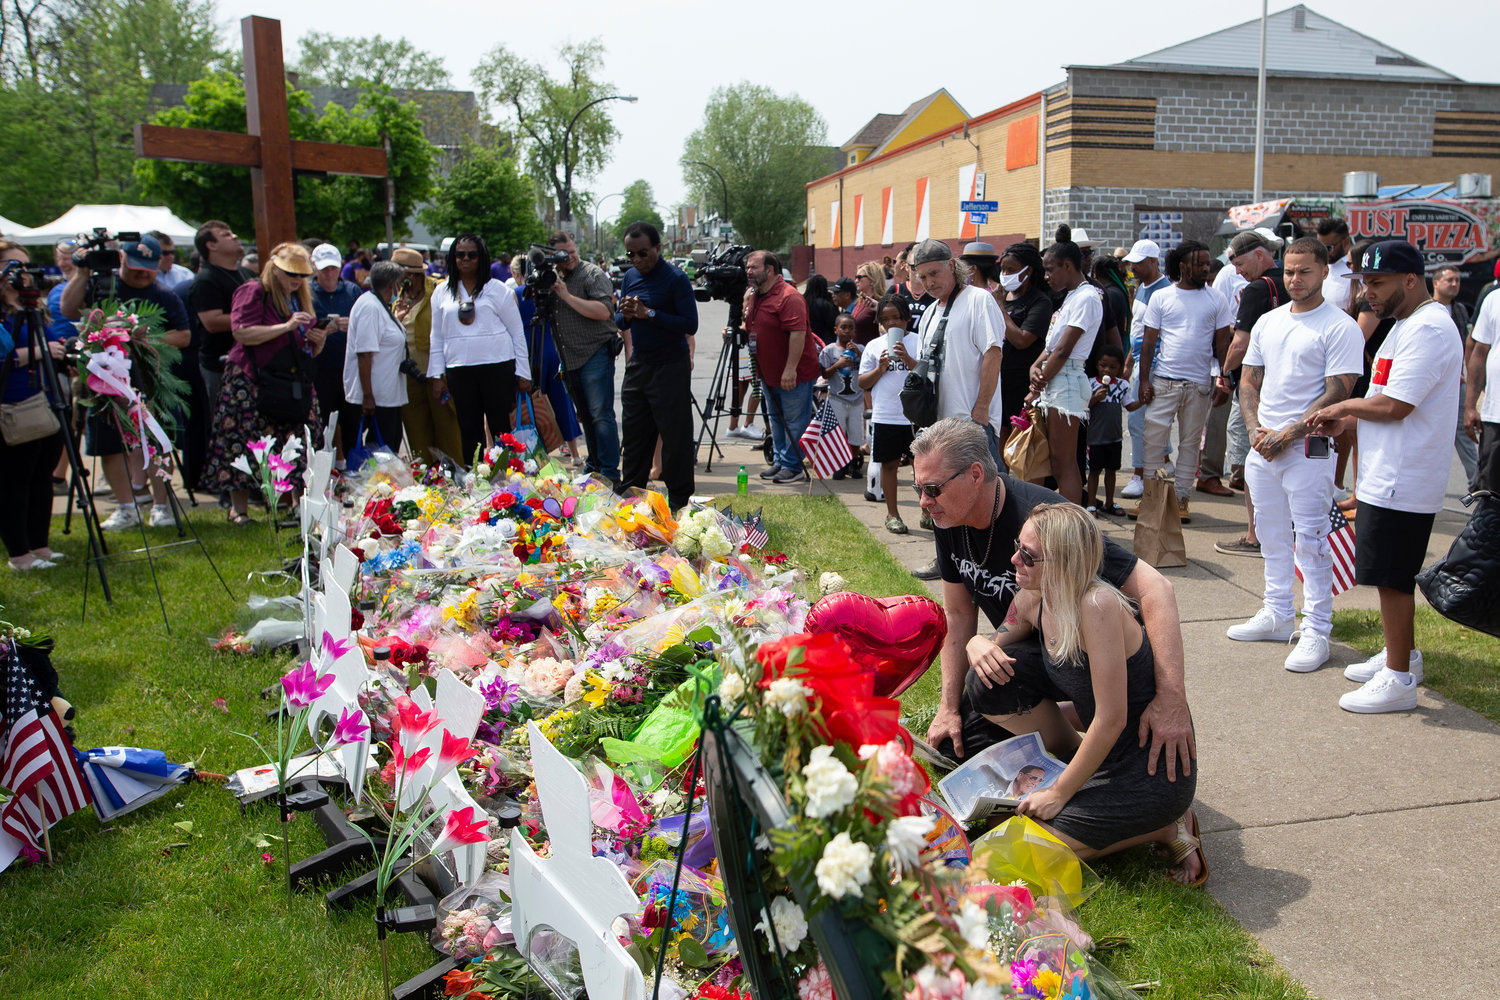 Michael Jordan and Heather Delorm, friends of Buffalo shooting victim Roberta Drury, visit a memorial for the victims of the Buffalo supermarket shooting outside the Tops Friendly Market on Saturday, May 21, 2022, in Buffalo, N.Y.  Tops was encouraging people to join its stores in a moment of silence to honor the shooting victims Saturday at 2:30 p.m., the approximate time of the attack a week earlier. Buffalo Mayor Byron Brown also called for 123 seconds of silence from 2:28 p.m. to 2:31 p.m., followed by the ringing of church bells 13 times throughout the city to honor the 10 people killed and three wounded.(AP Photo/Joshua Bessex)